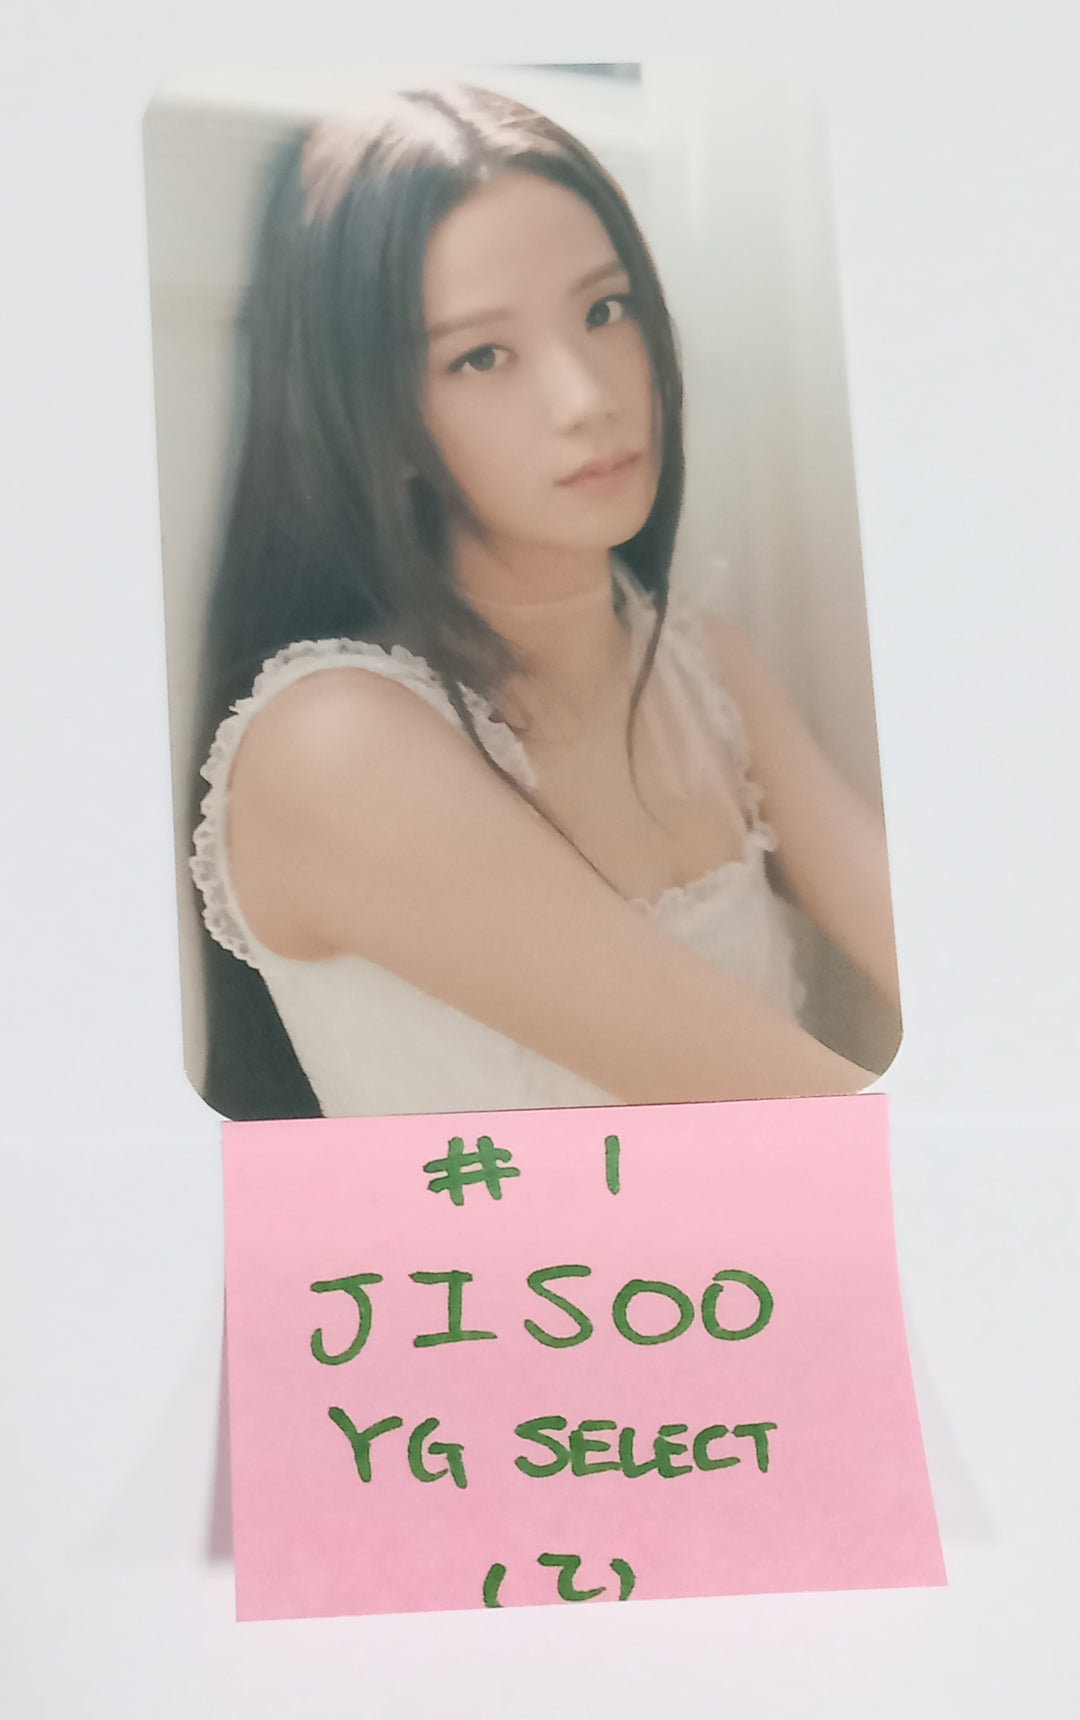 JISOO (Of Black Pink) "ME" - YG Select Shop Pre-Order Benefit Photocard [Photo Book Special Edition] [23.09.21]